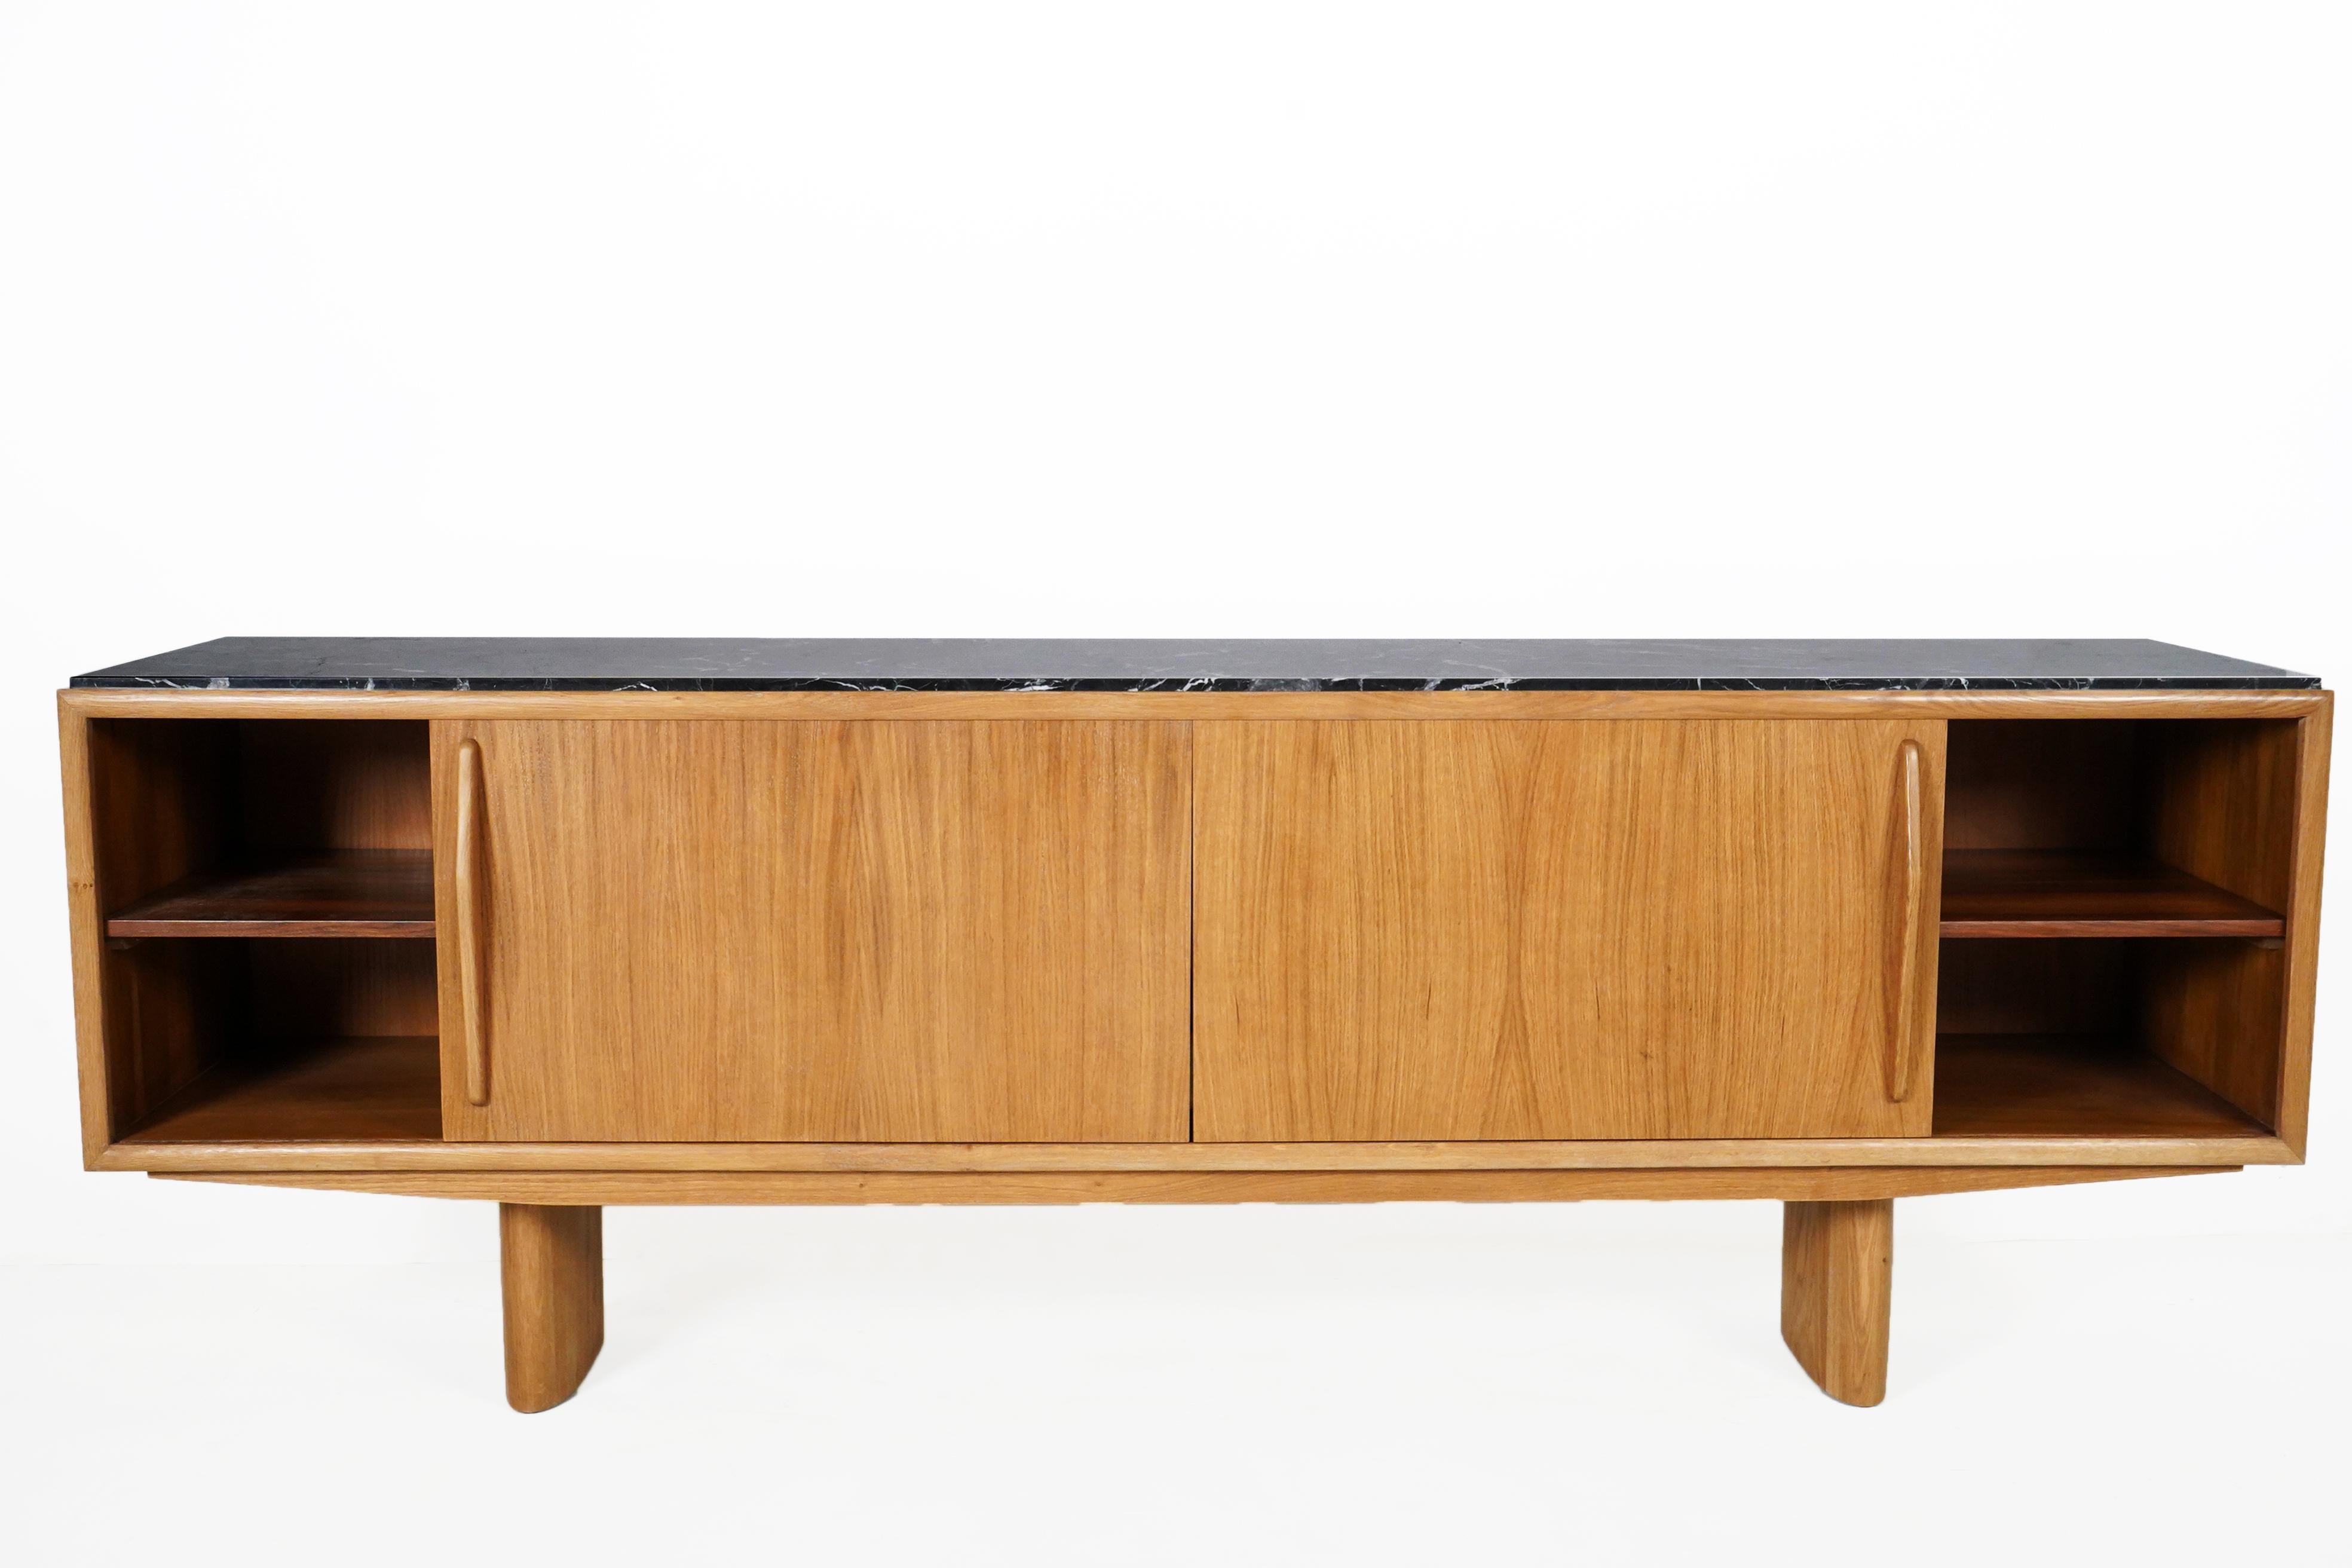 Hungarian Mid-Century Modern Oak Sideboard with 2 Sliding Doors and 3 Drawers For Sale